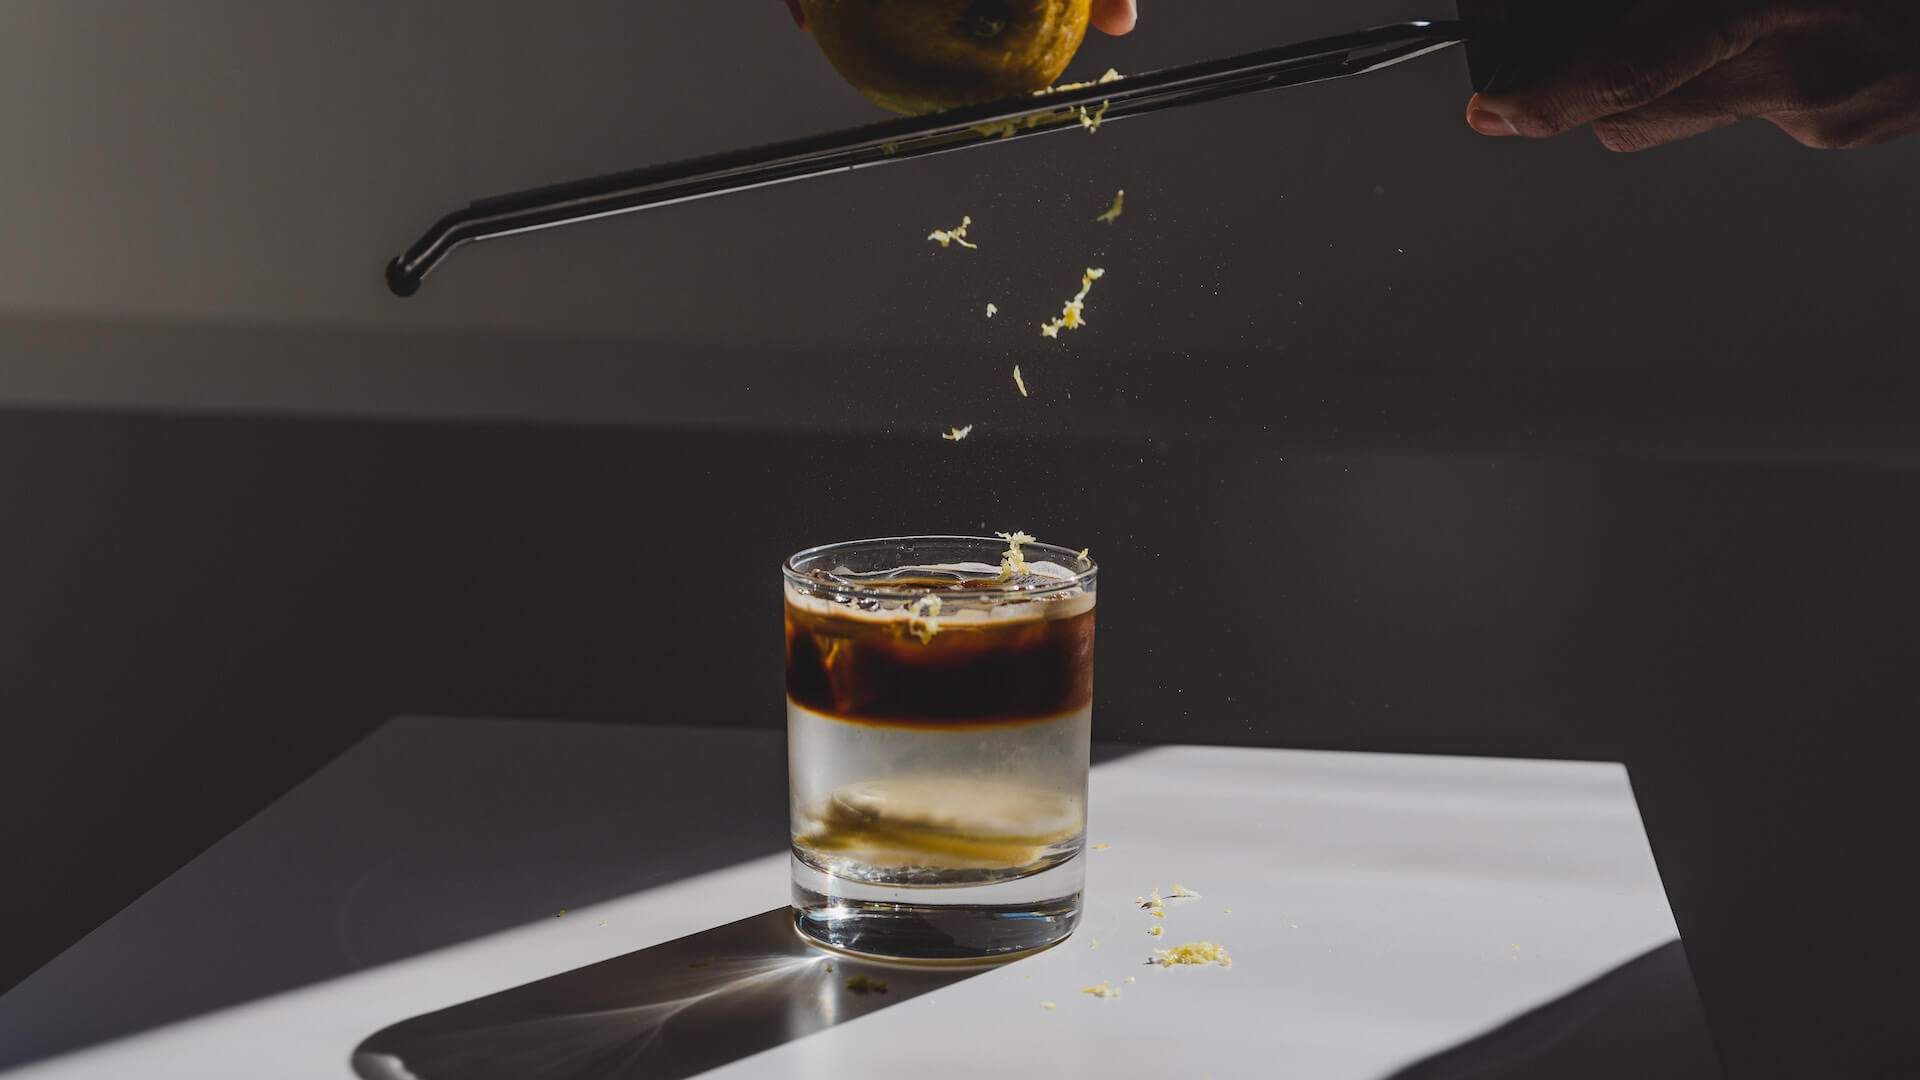 The iced citrus long black made with a shot of coffee, a few slices of lemon and a dusting of lemon rind from INI Studio - home to some of the best coffee in Melbourne.